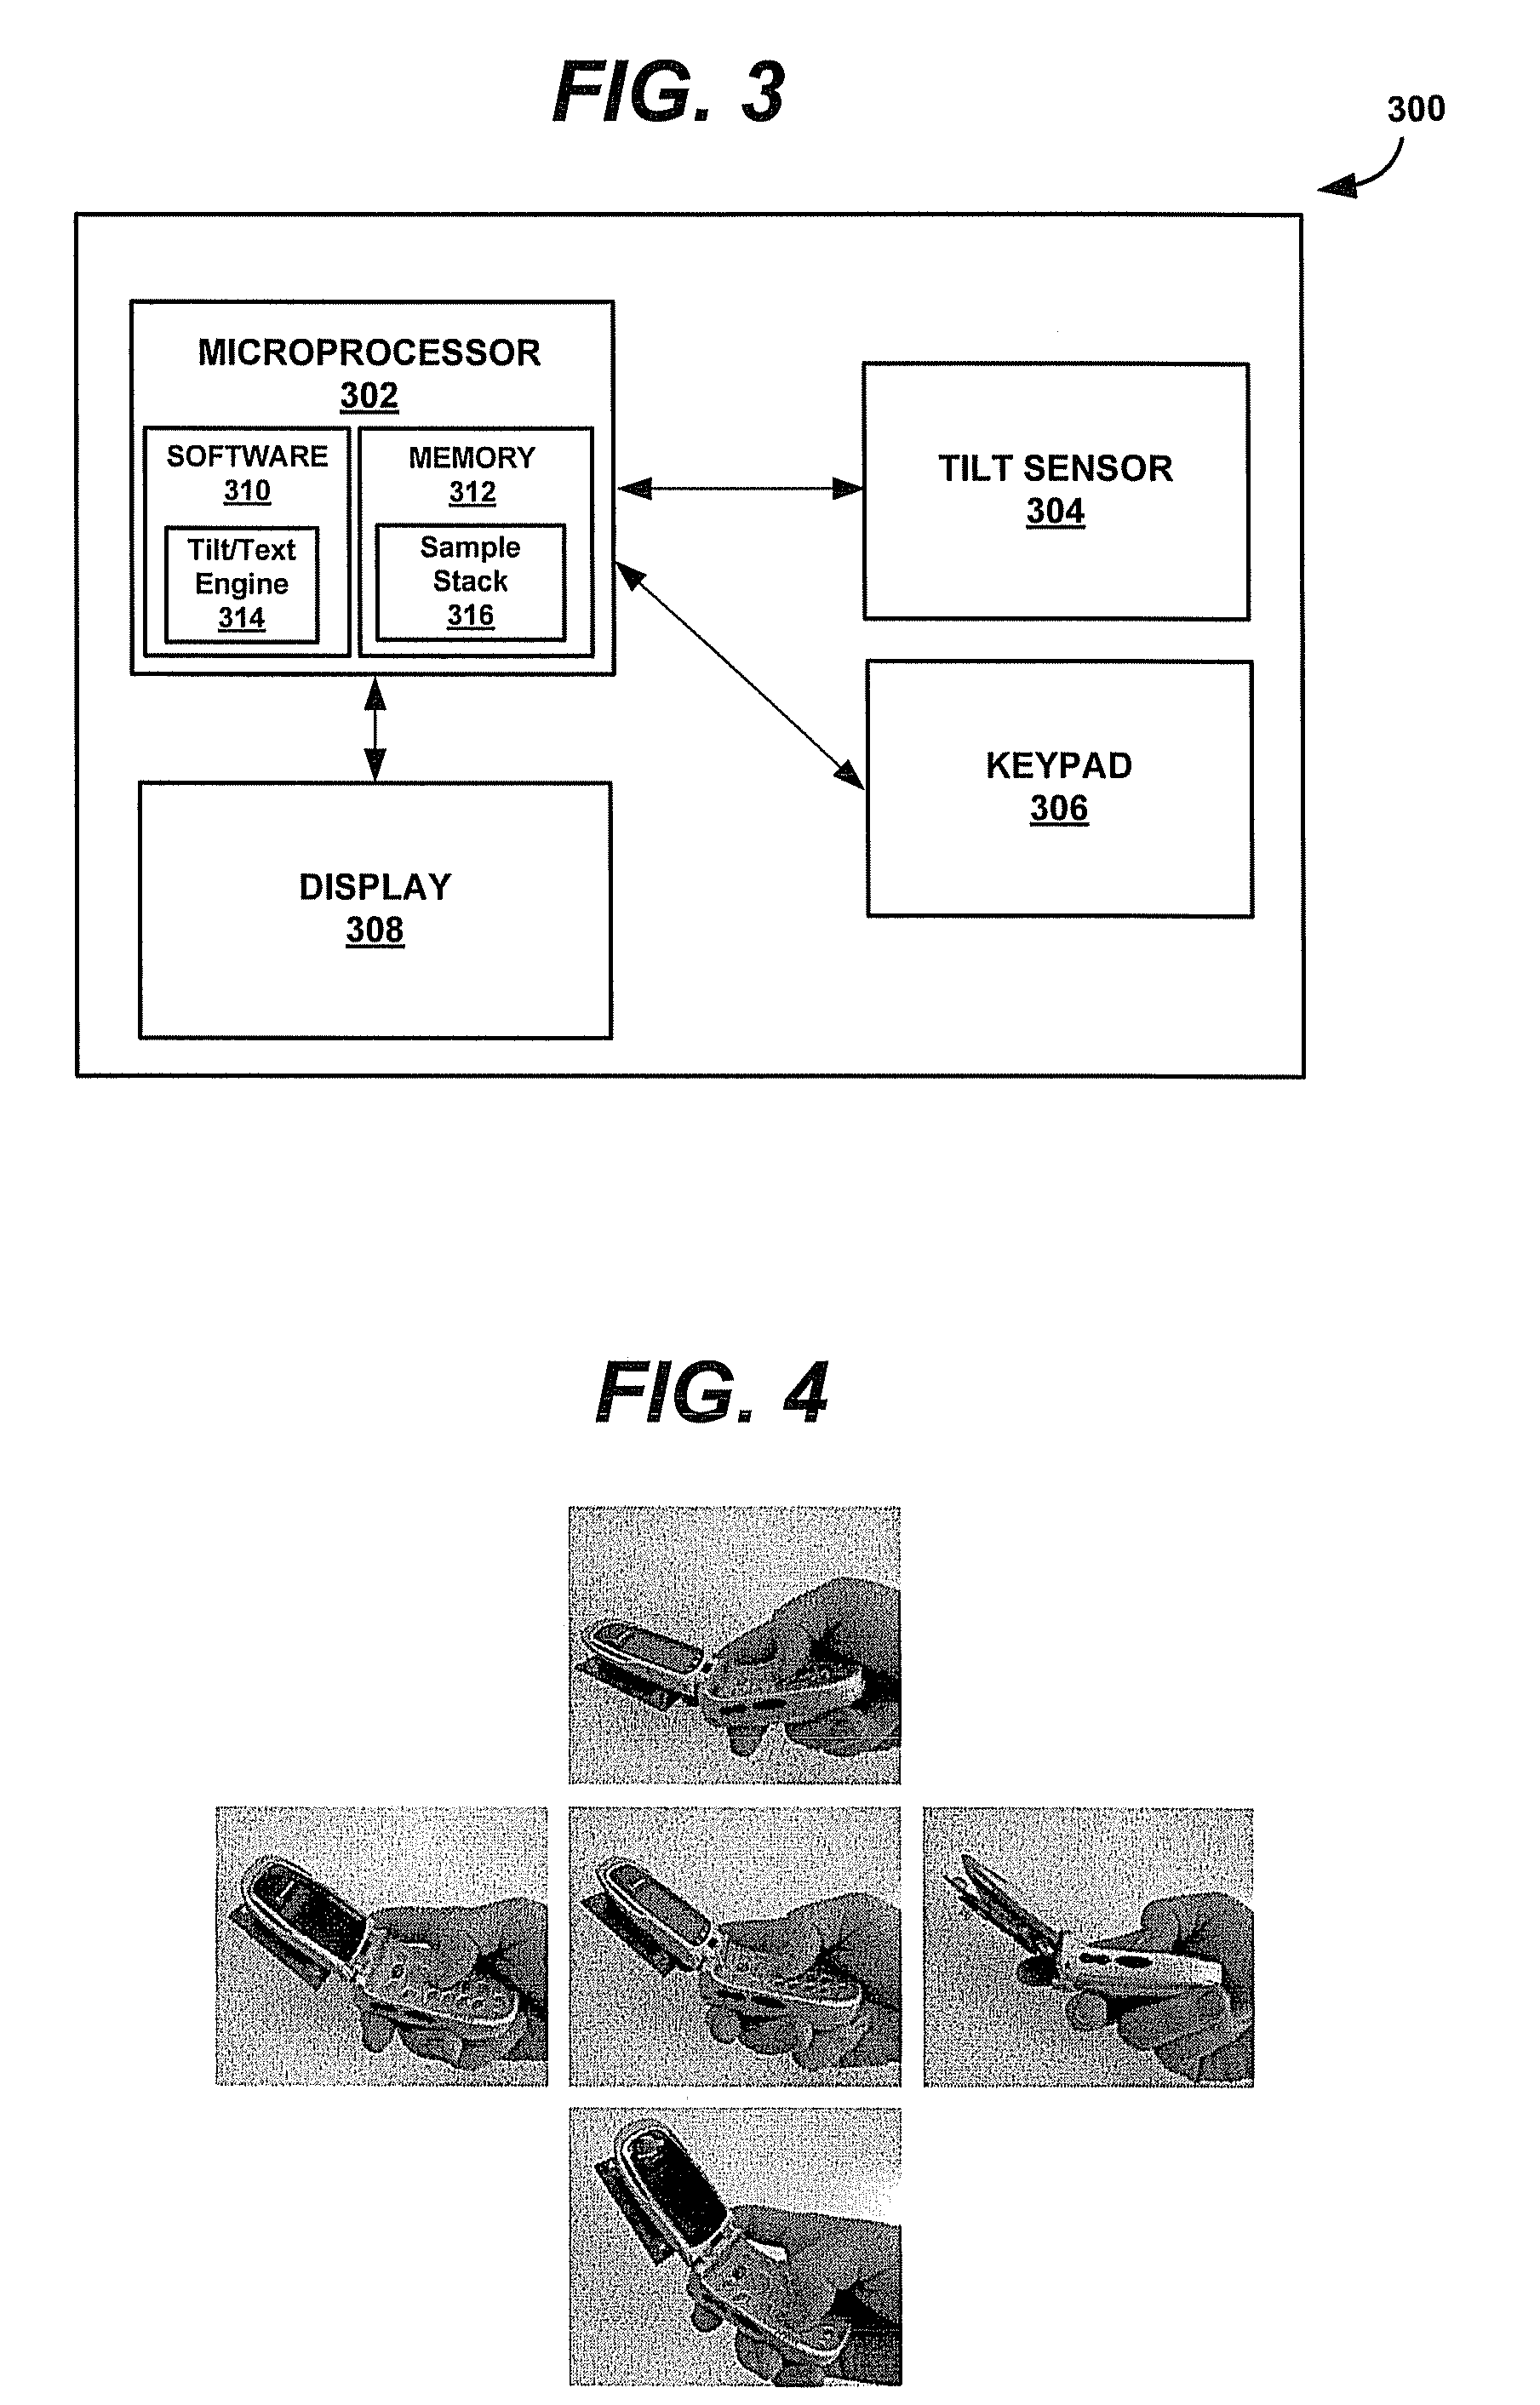 Concurrent data entry for a portable device